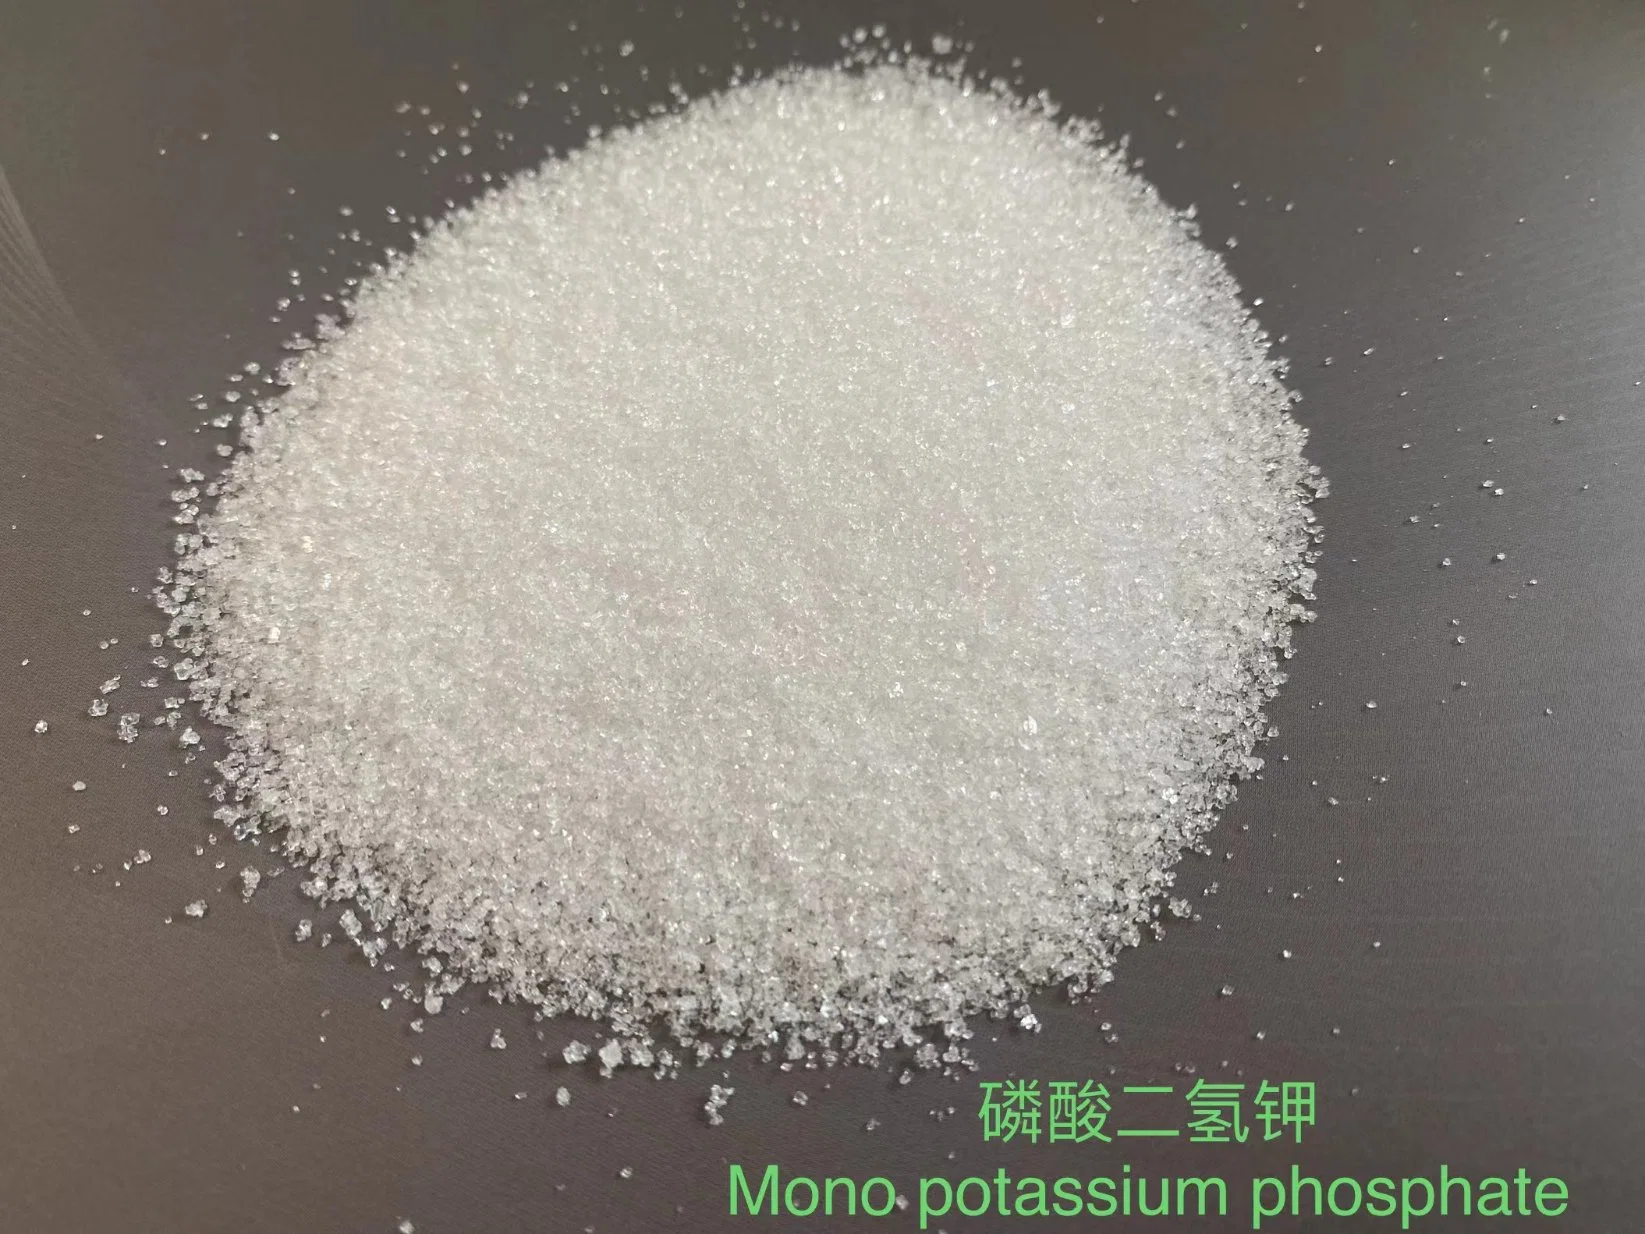 Factory Supply Agrochemical Pesticide Insecticide Amitraz CAS 33089-61-1